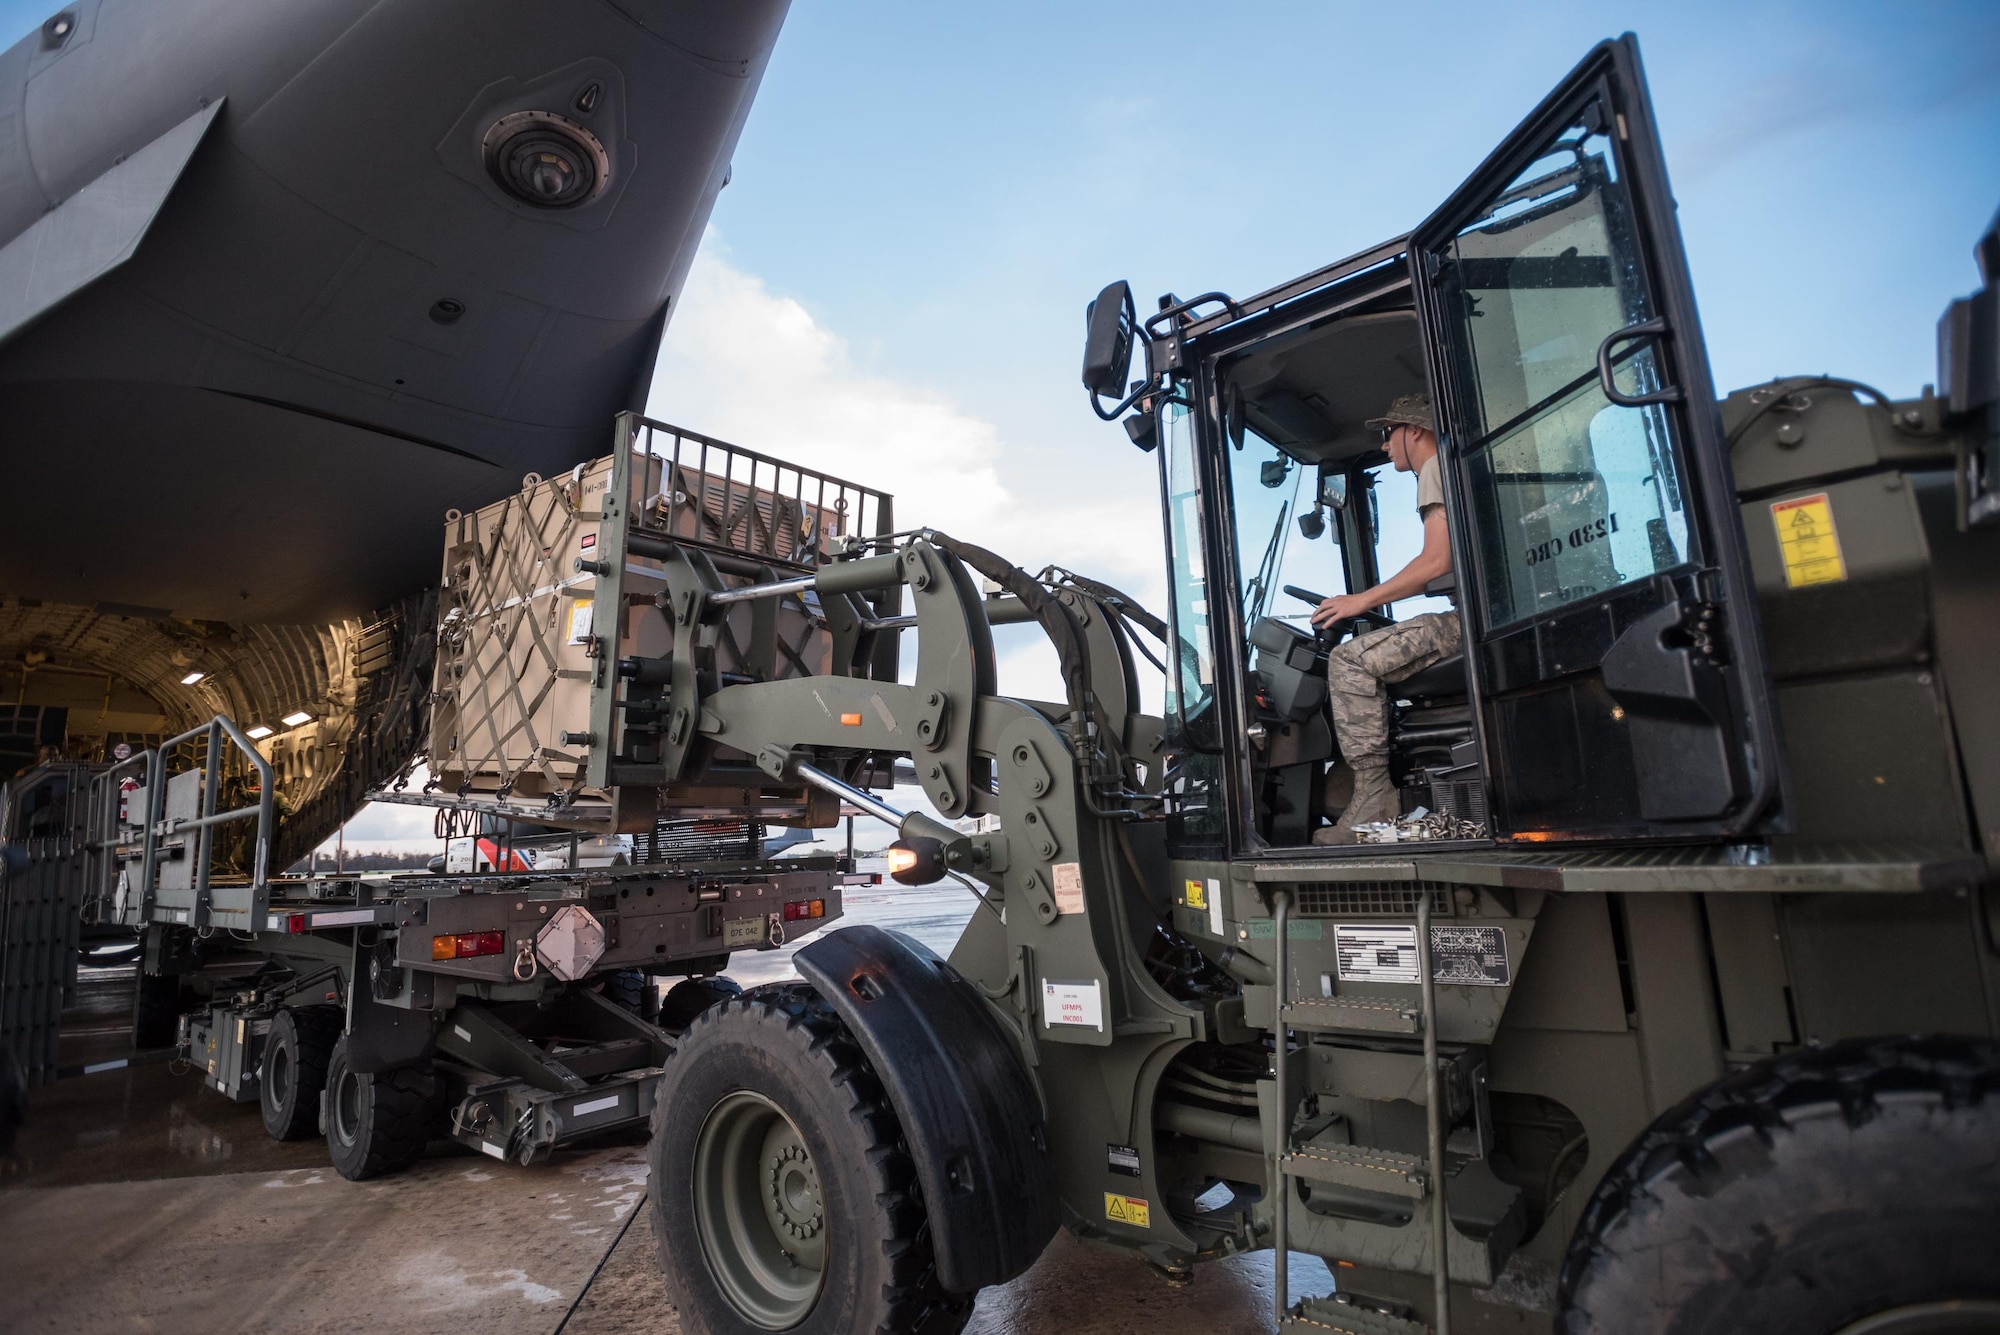 Airmen from the Kentucky Air National Guard’s 123rd Contingency Response Group, augmented by troops from the active-duty Air Force and Air National Guard units in multiple states, dowload relief supplies from aircraft around the clock at Luis Muñoz Marín International Airport in San Juan, Puerto Rico, in the wake of Hurricane Maria Oct. 6, 2017. The unit’s Airmen established an aerial port of debarkation upon arrival here Sept. 23, and have processed more than 7.2 million pounds of cargo and humanitarian aid for distribution in the first three weeks of the operation. (U.S. Air National Guard photo by Lt. Col. Dale Greer)